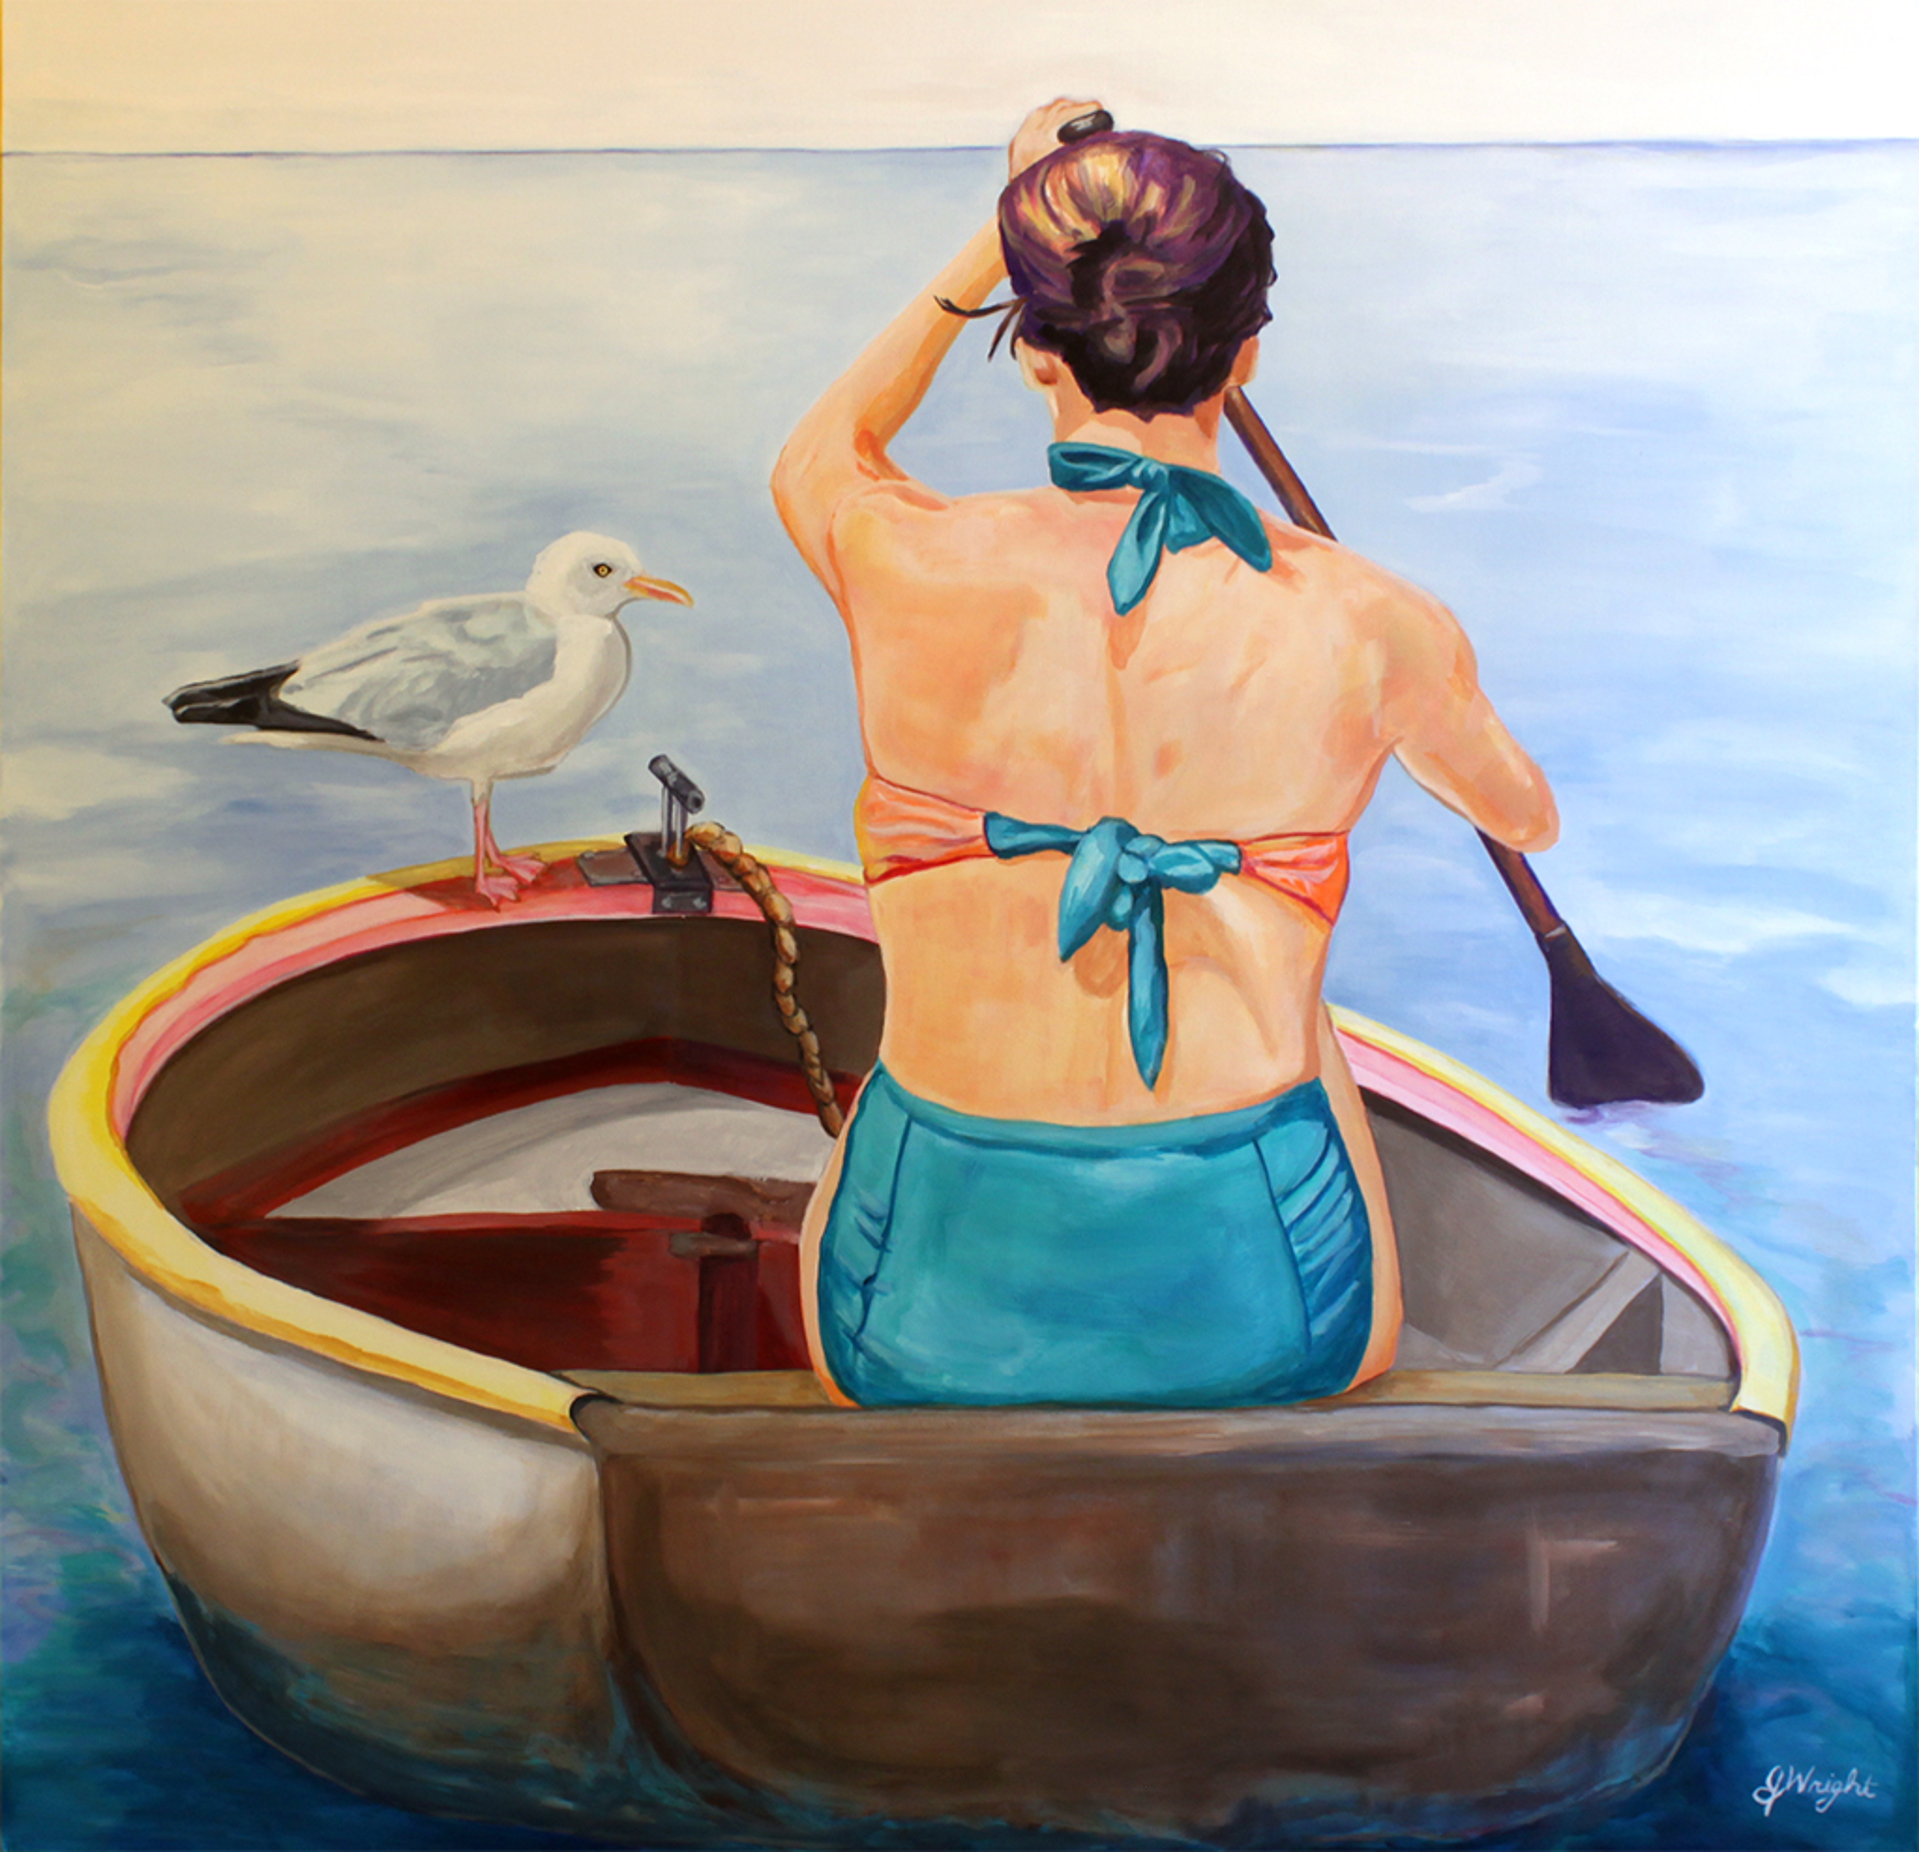 Journey: The Woman and the Gull by Jody Wright